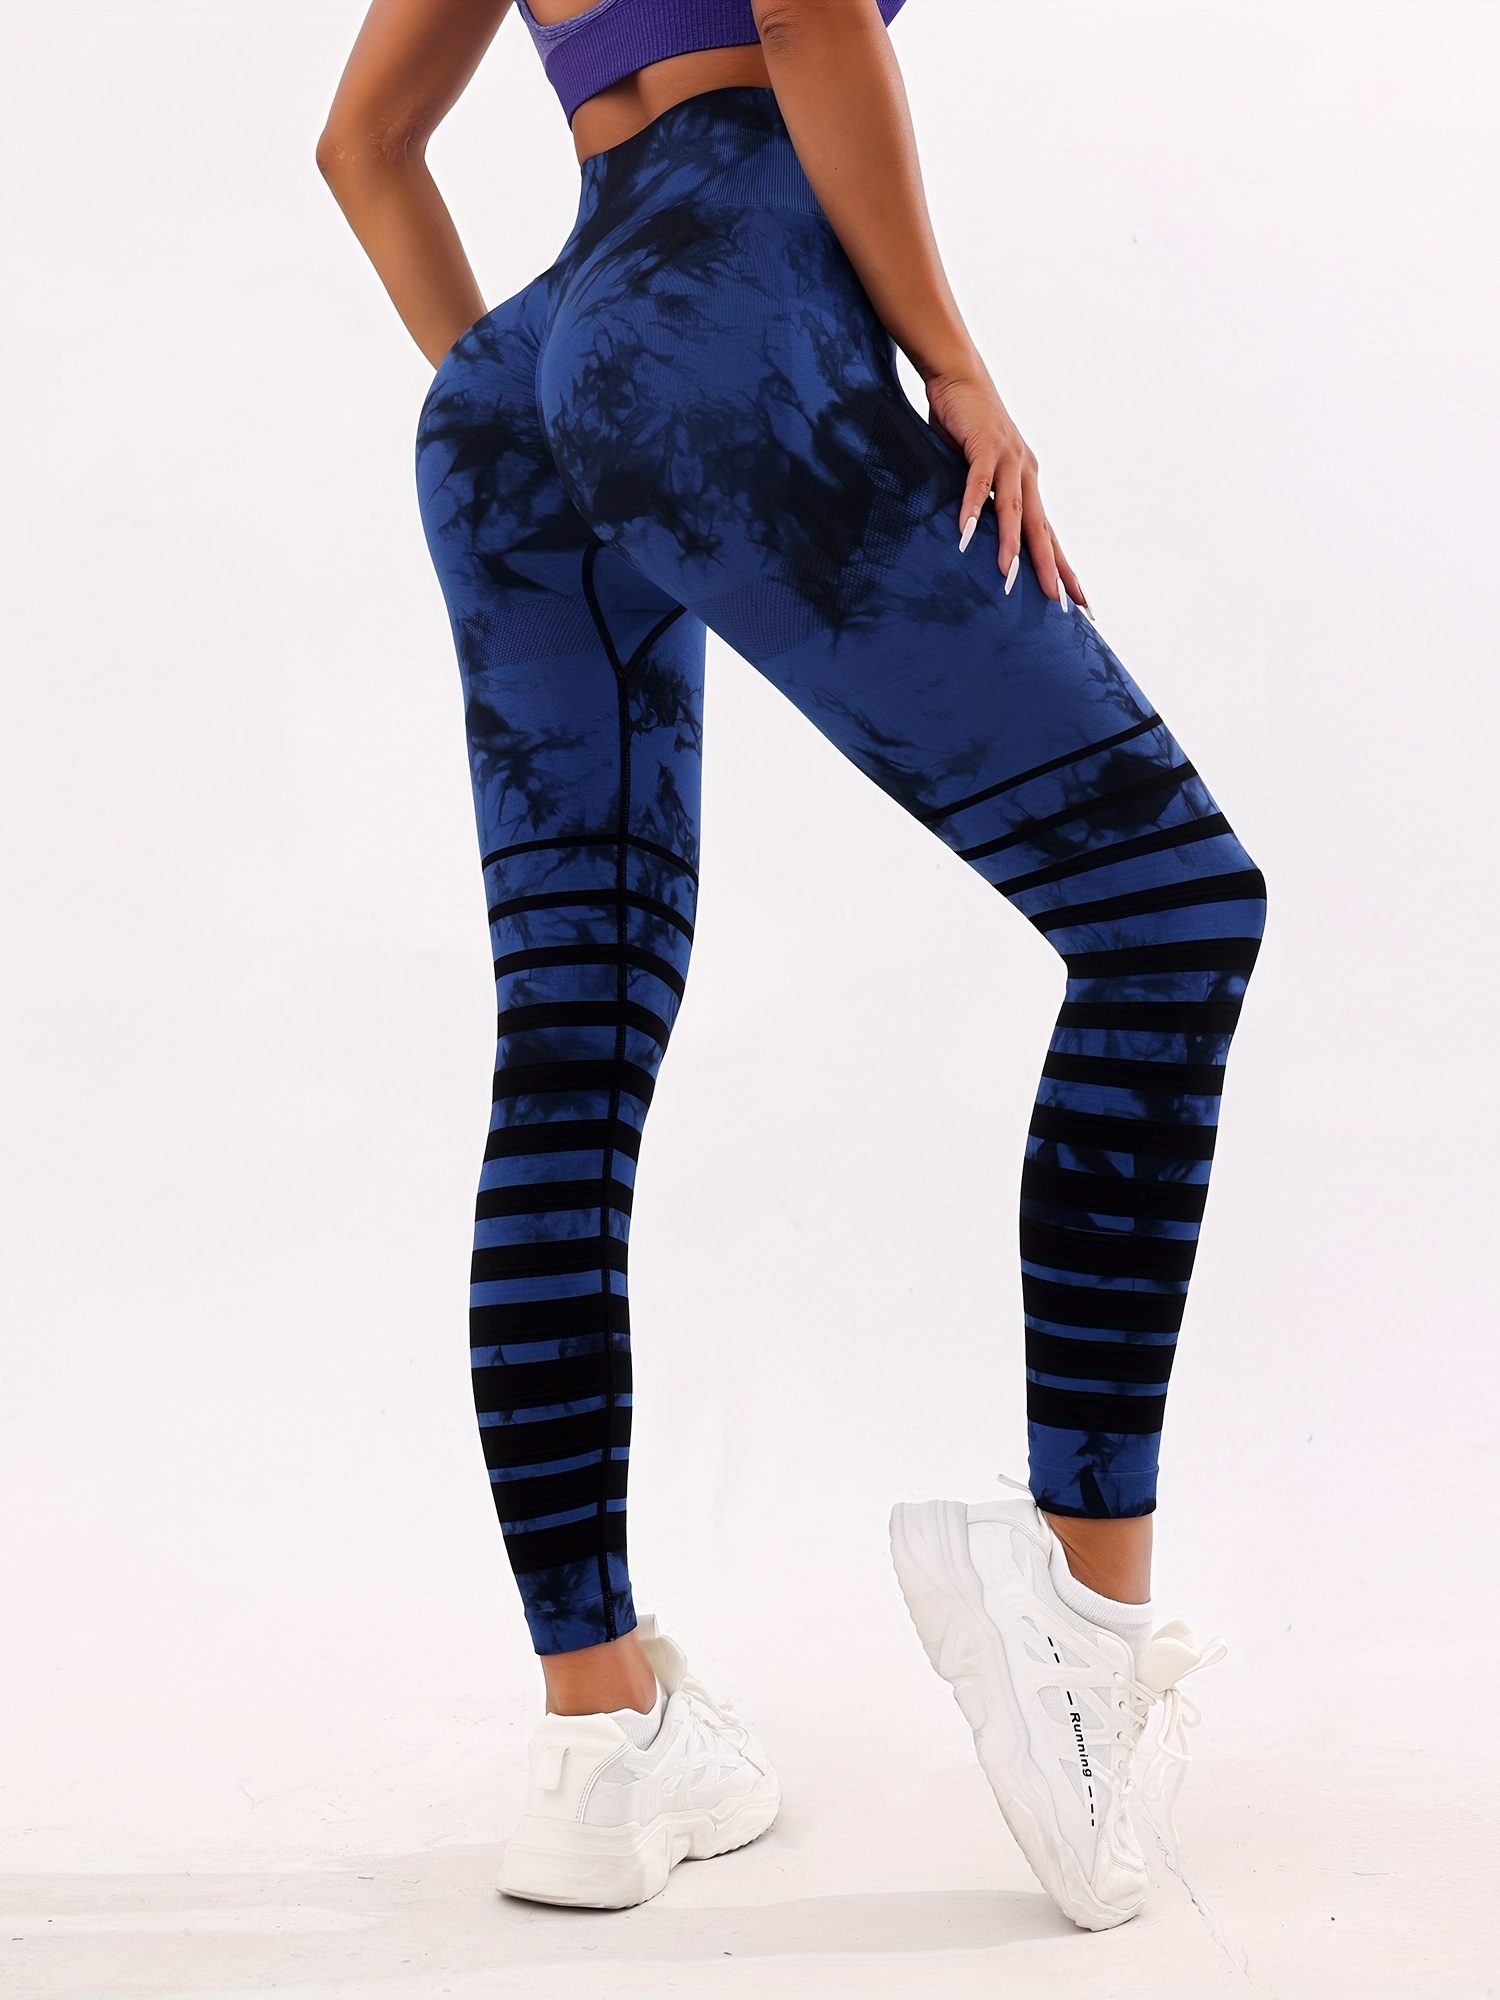 High waisted Tie Dye Yoga Leggings For Women Fashionable And